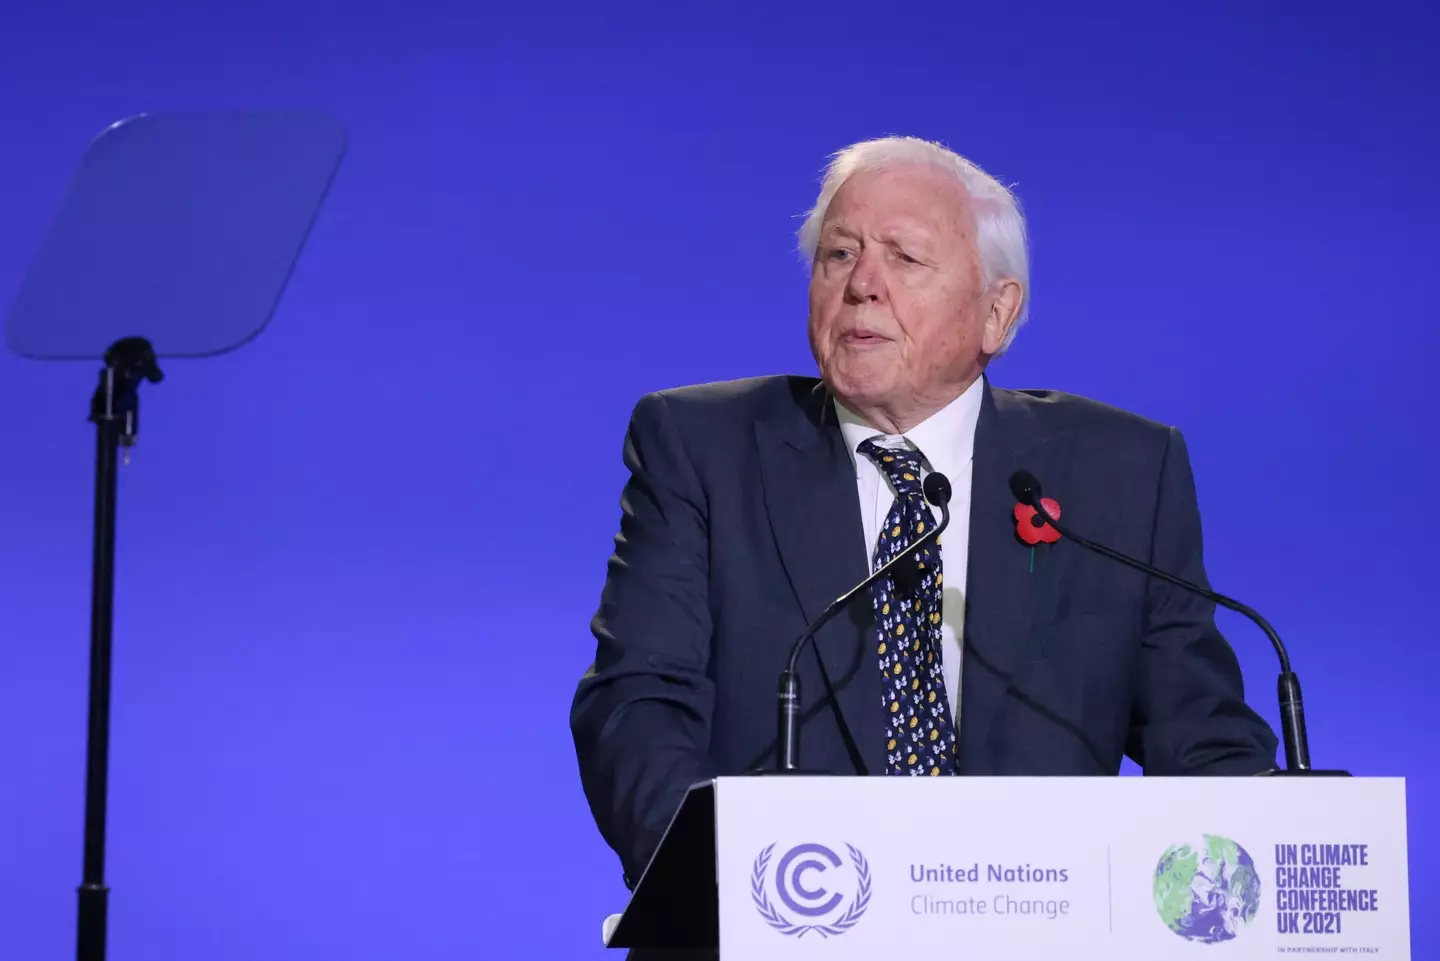 Sir David Attenborough urged the world to stick to the COP26 target of limiting global temperatures to rising by 1.5 degrees. (Yves Herman - WPA Pool/Getty Images)